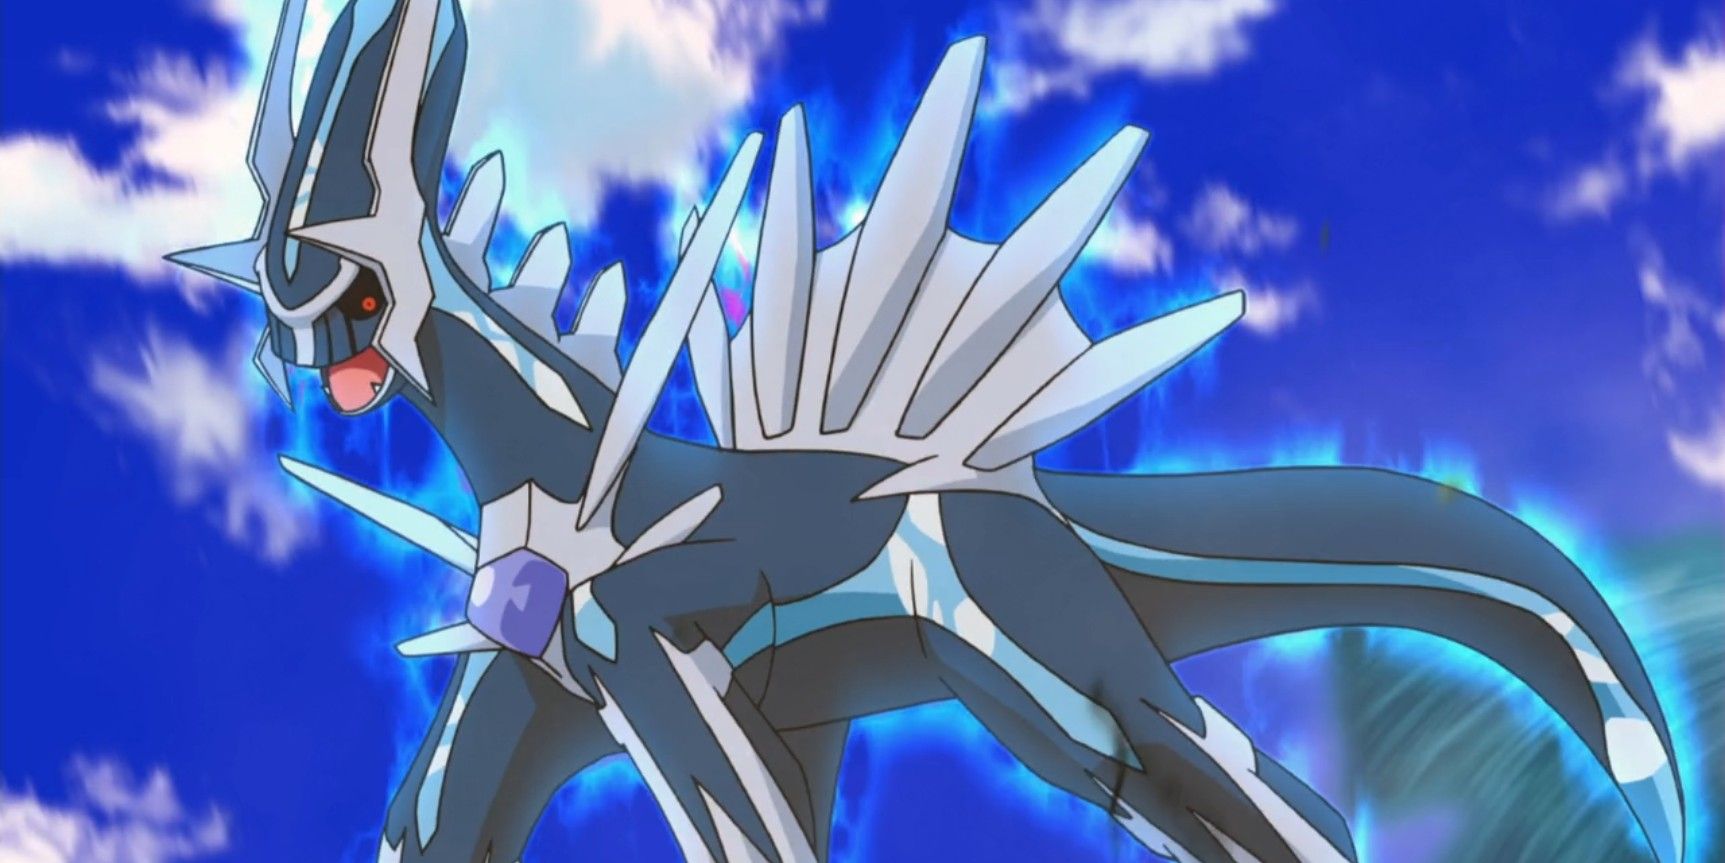 Dialga shining with a blue aura in one of the Pokémon movies